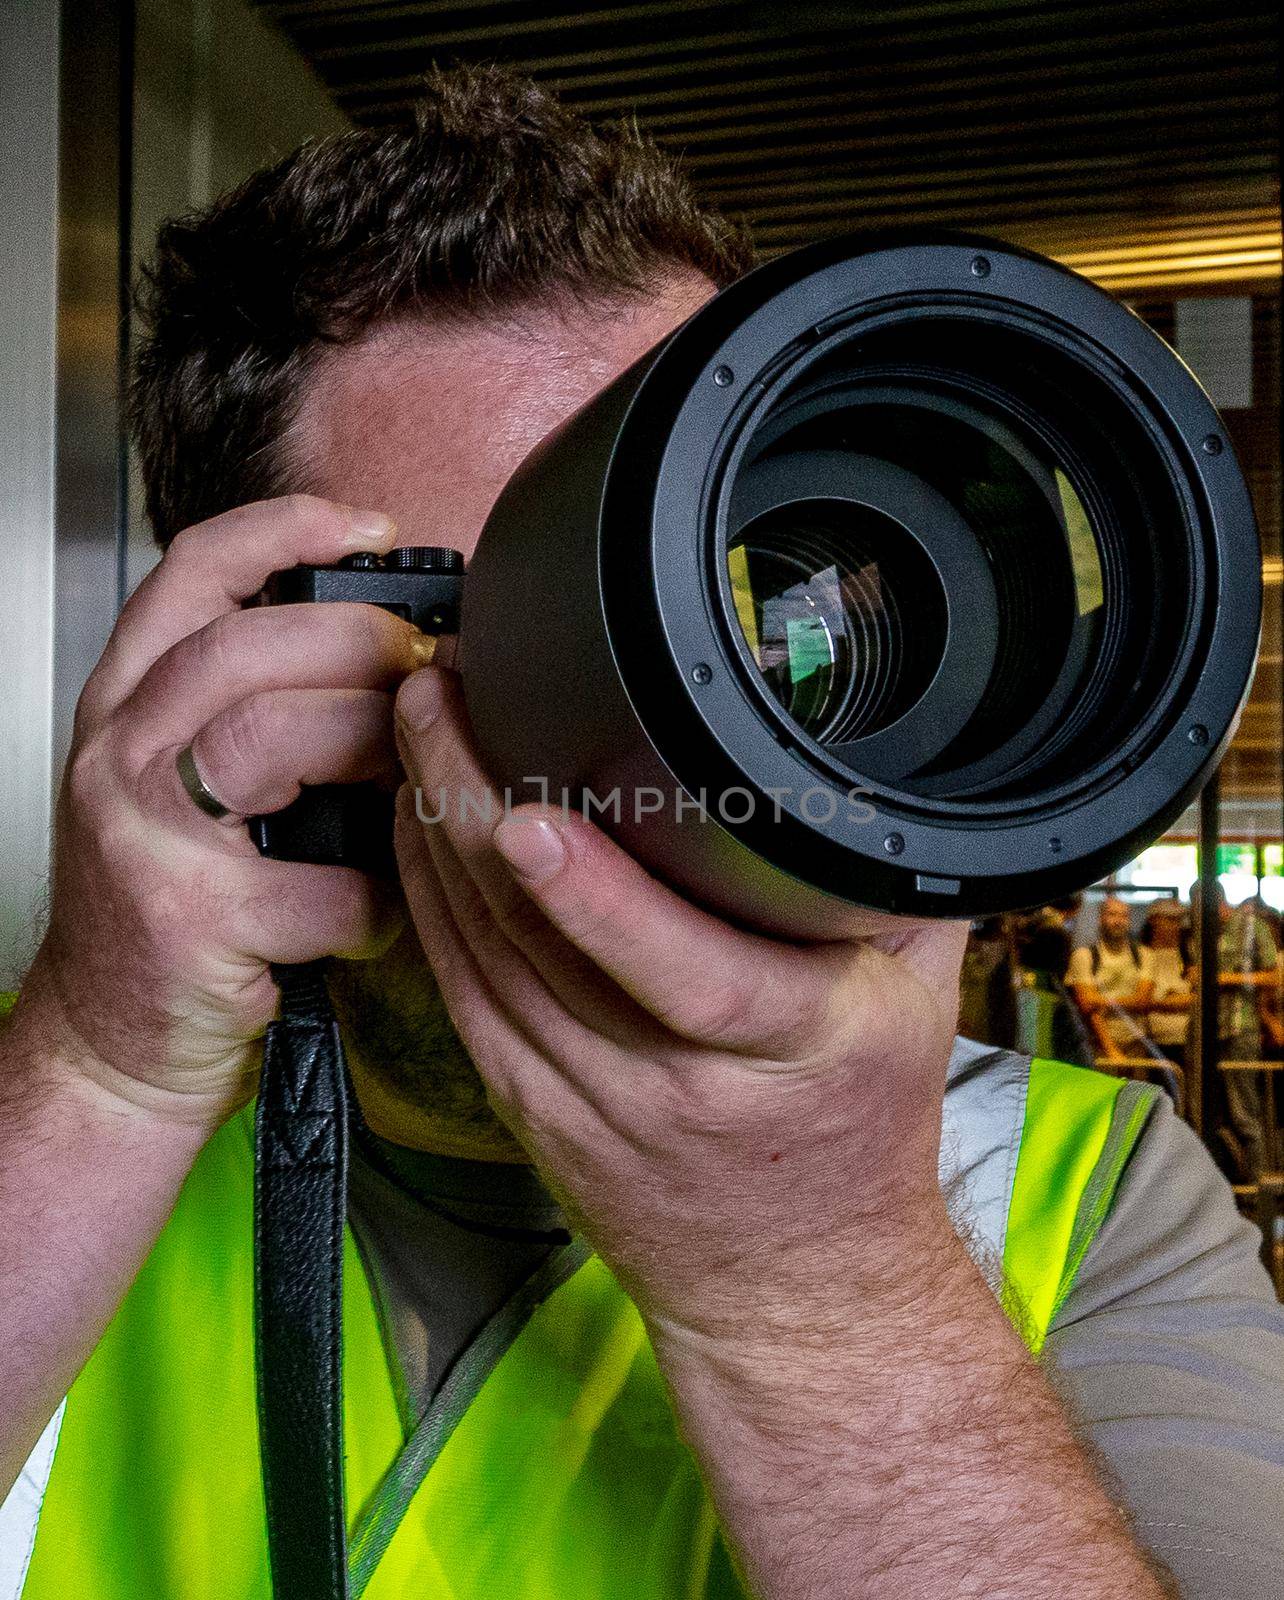 A male photographer in a green reflective vest looks through the camera's viewfinder.